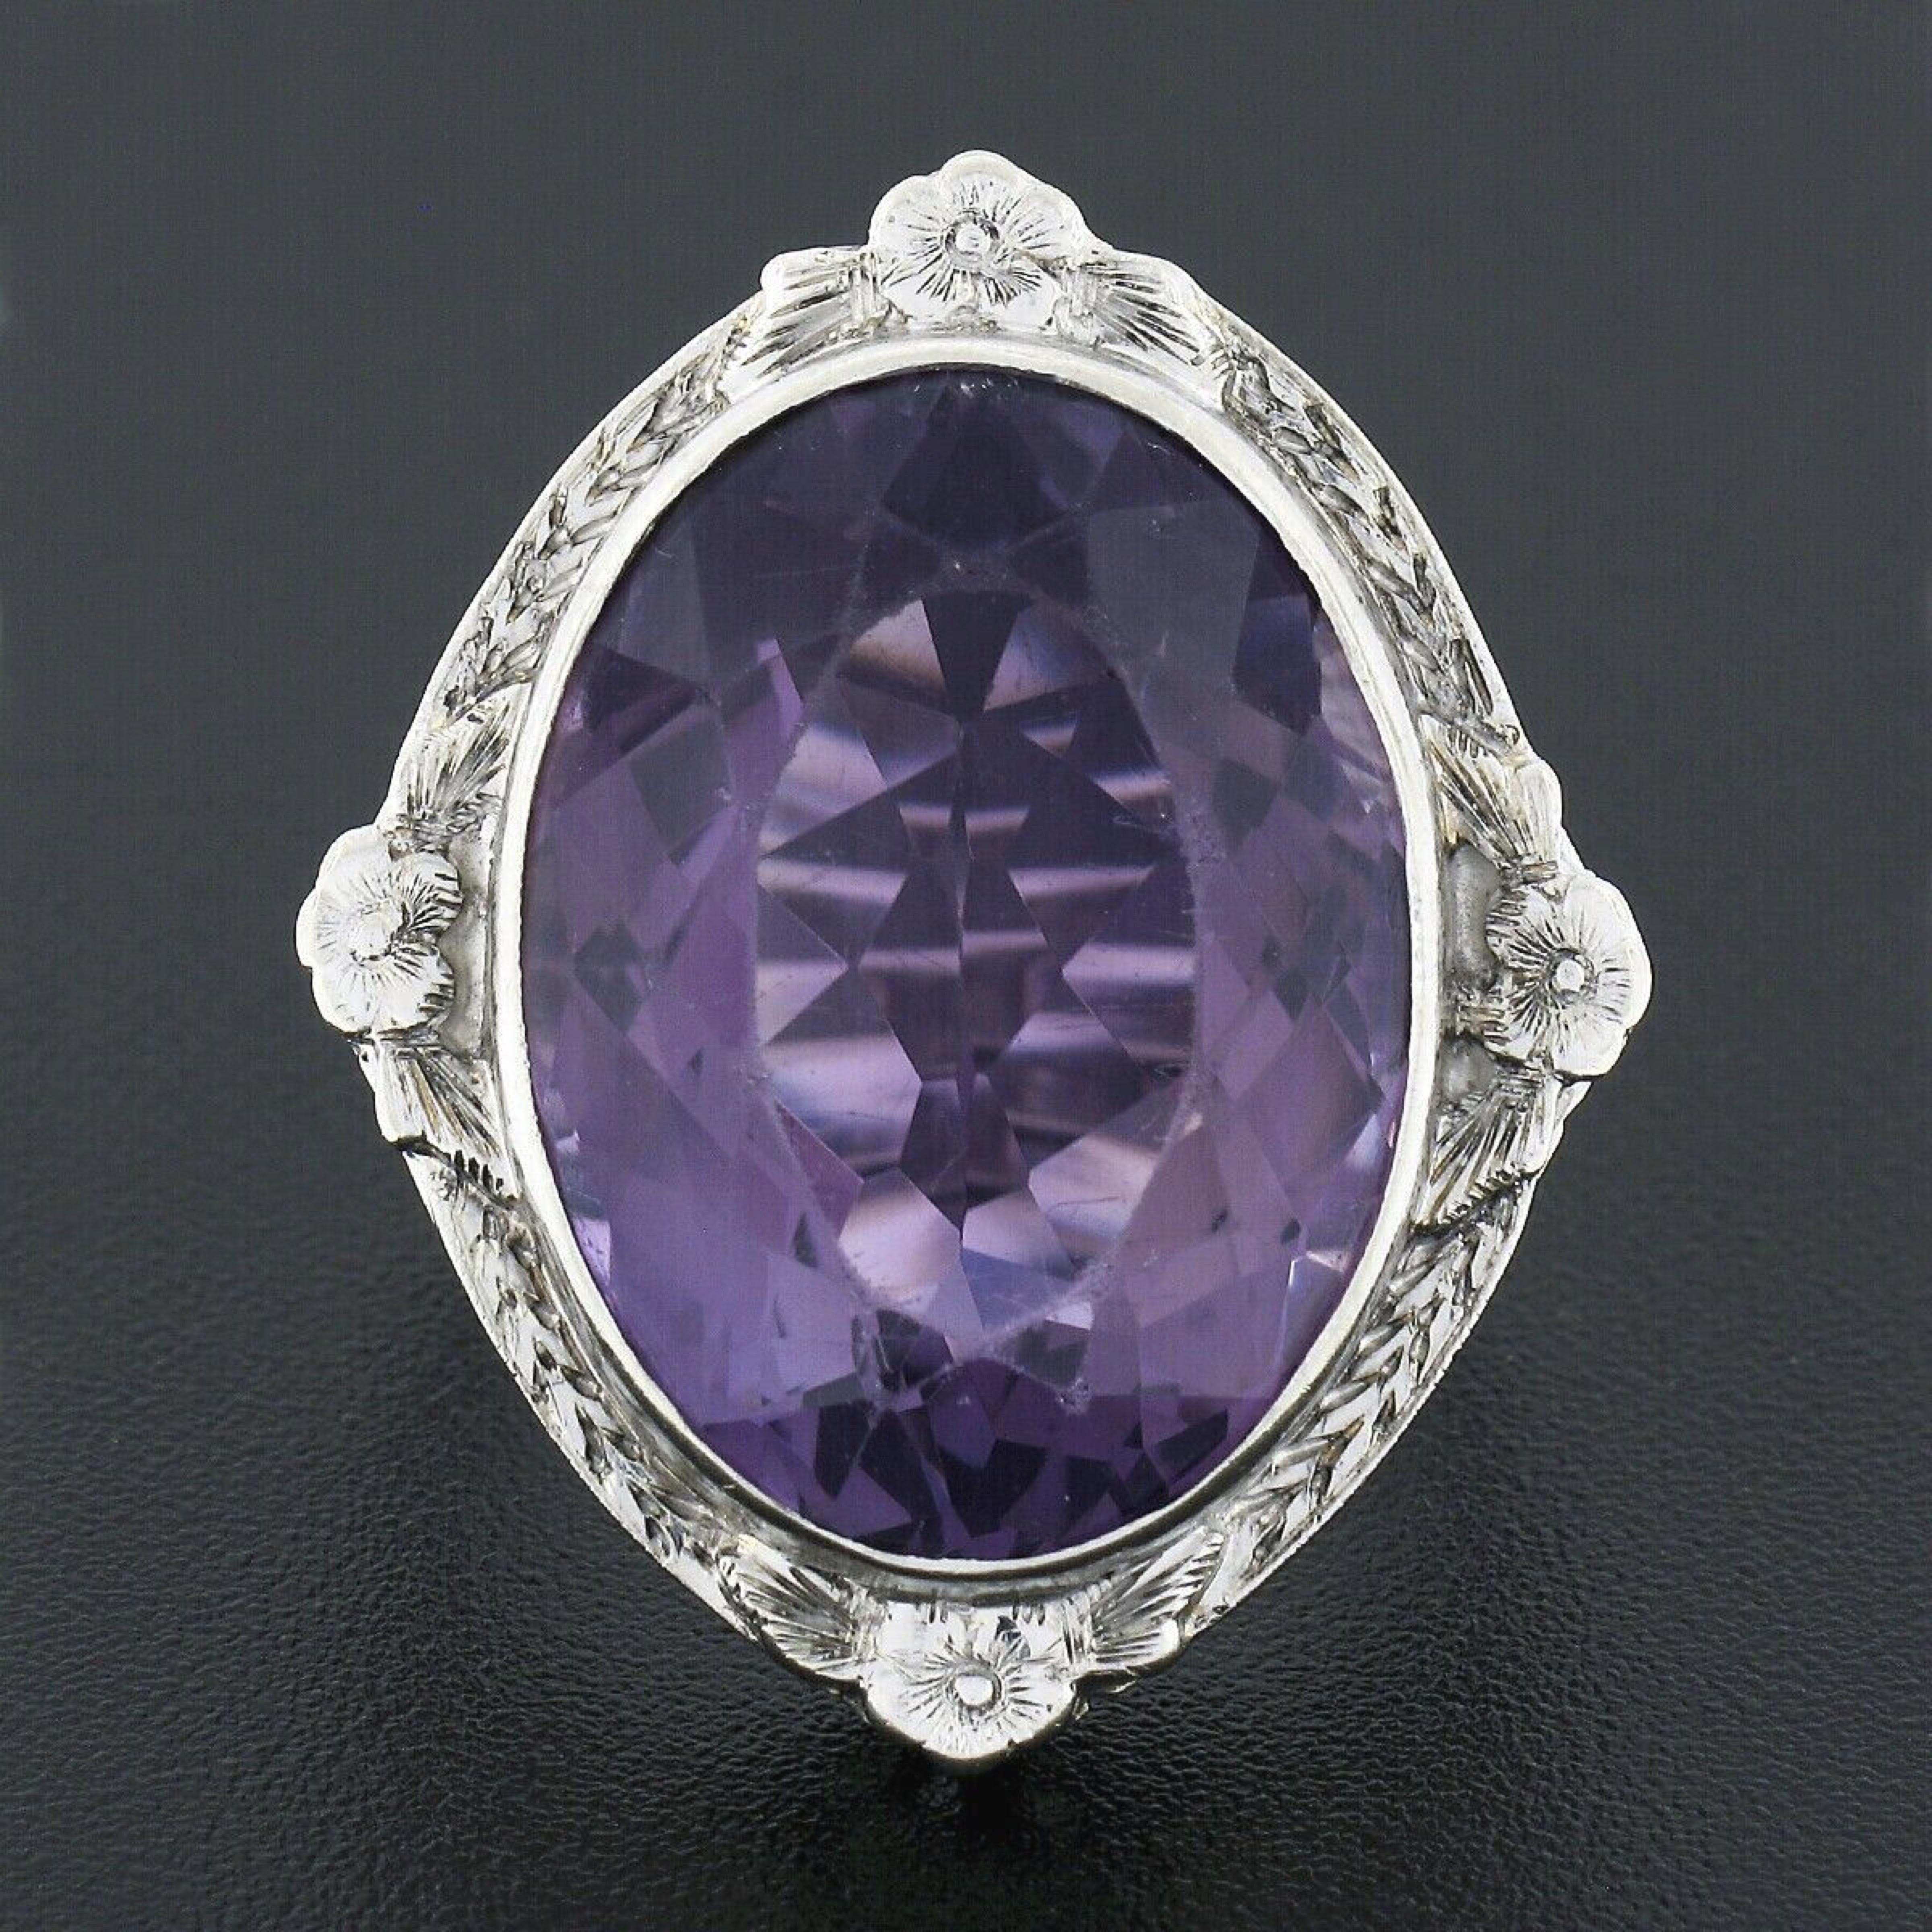 This magnificent antique cocktail ring was crafted from solid 14k white during the art deco period. The ring features a large, approximately 20x14.5mm, natural amethyst stone neatly bezel set at its center showing transparent medium purple color.